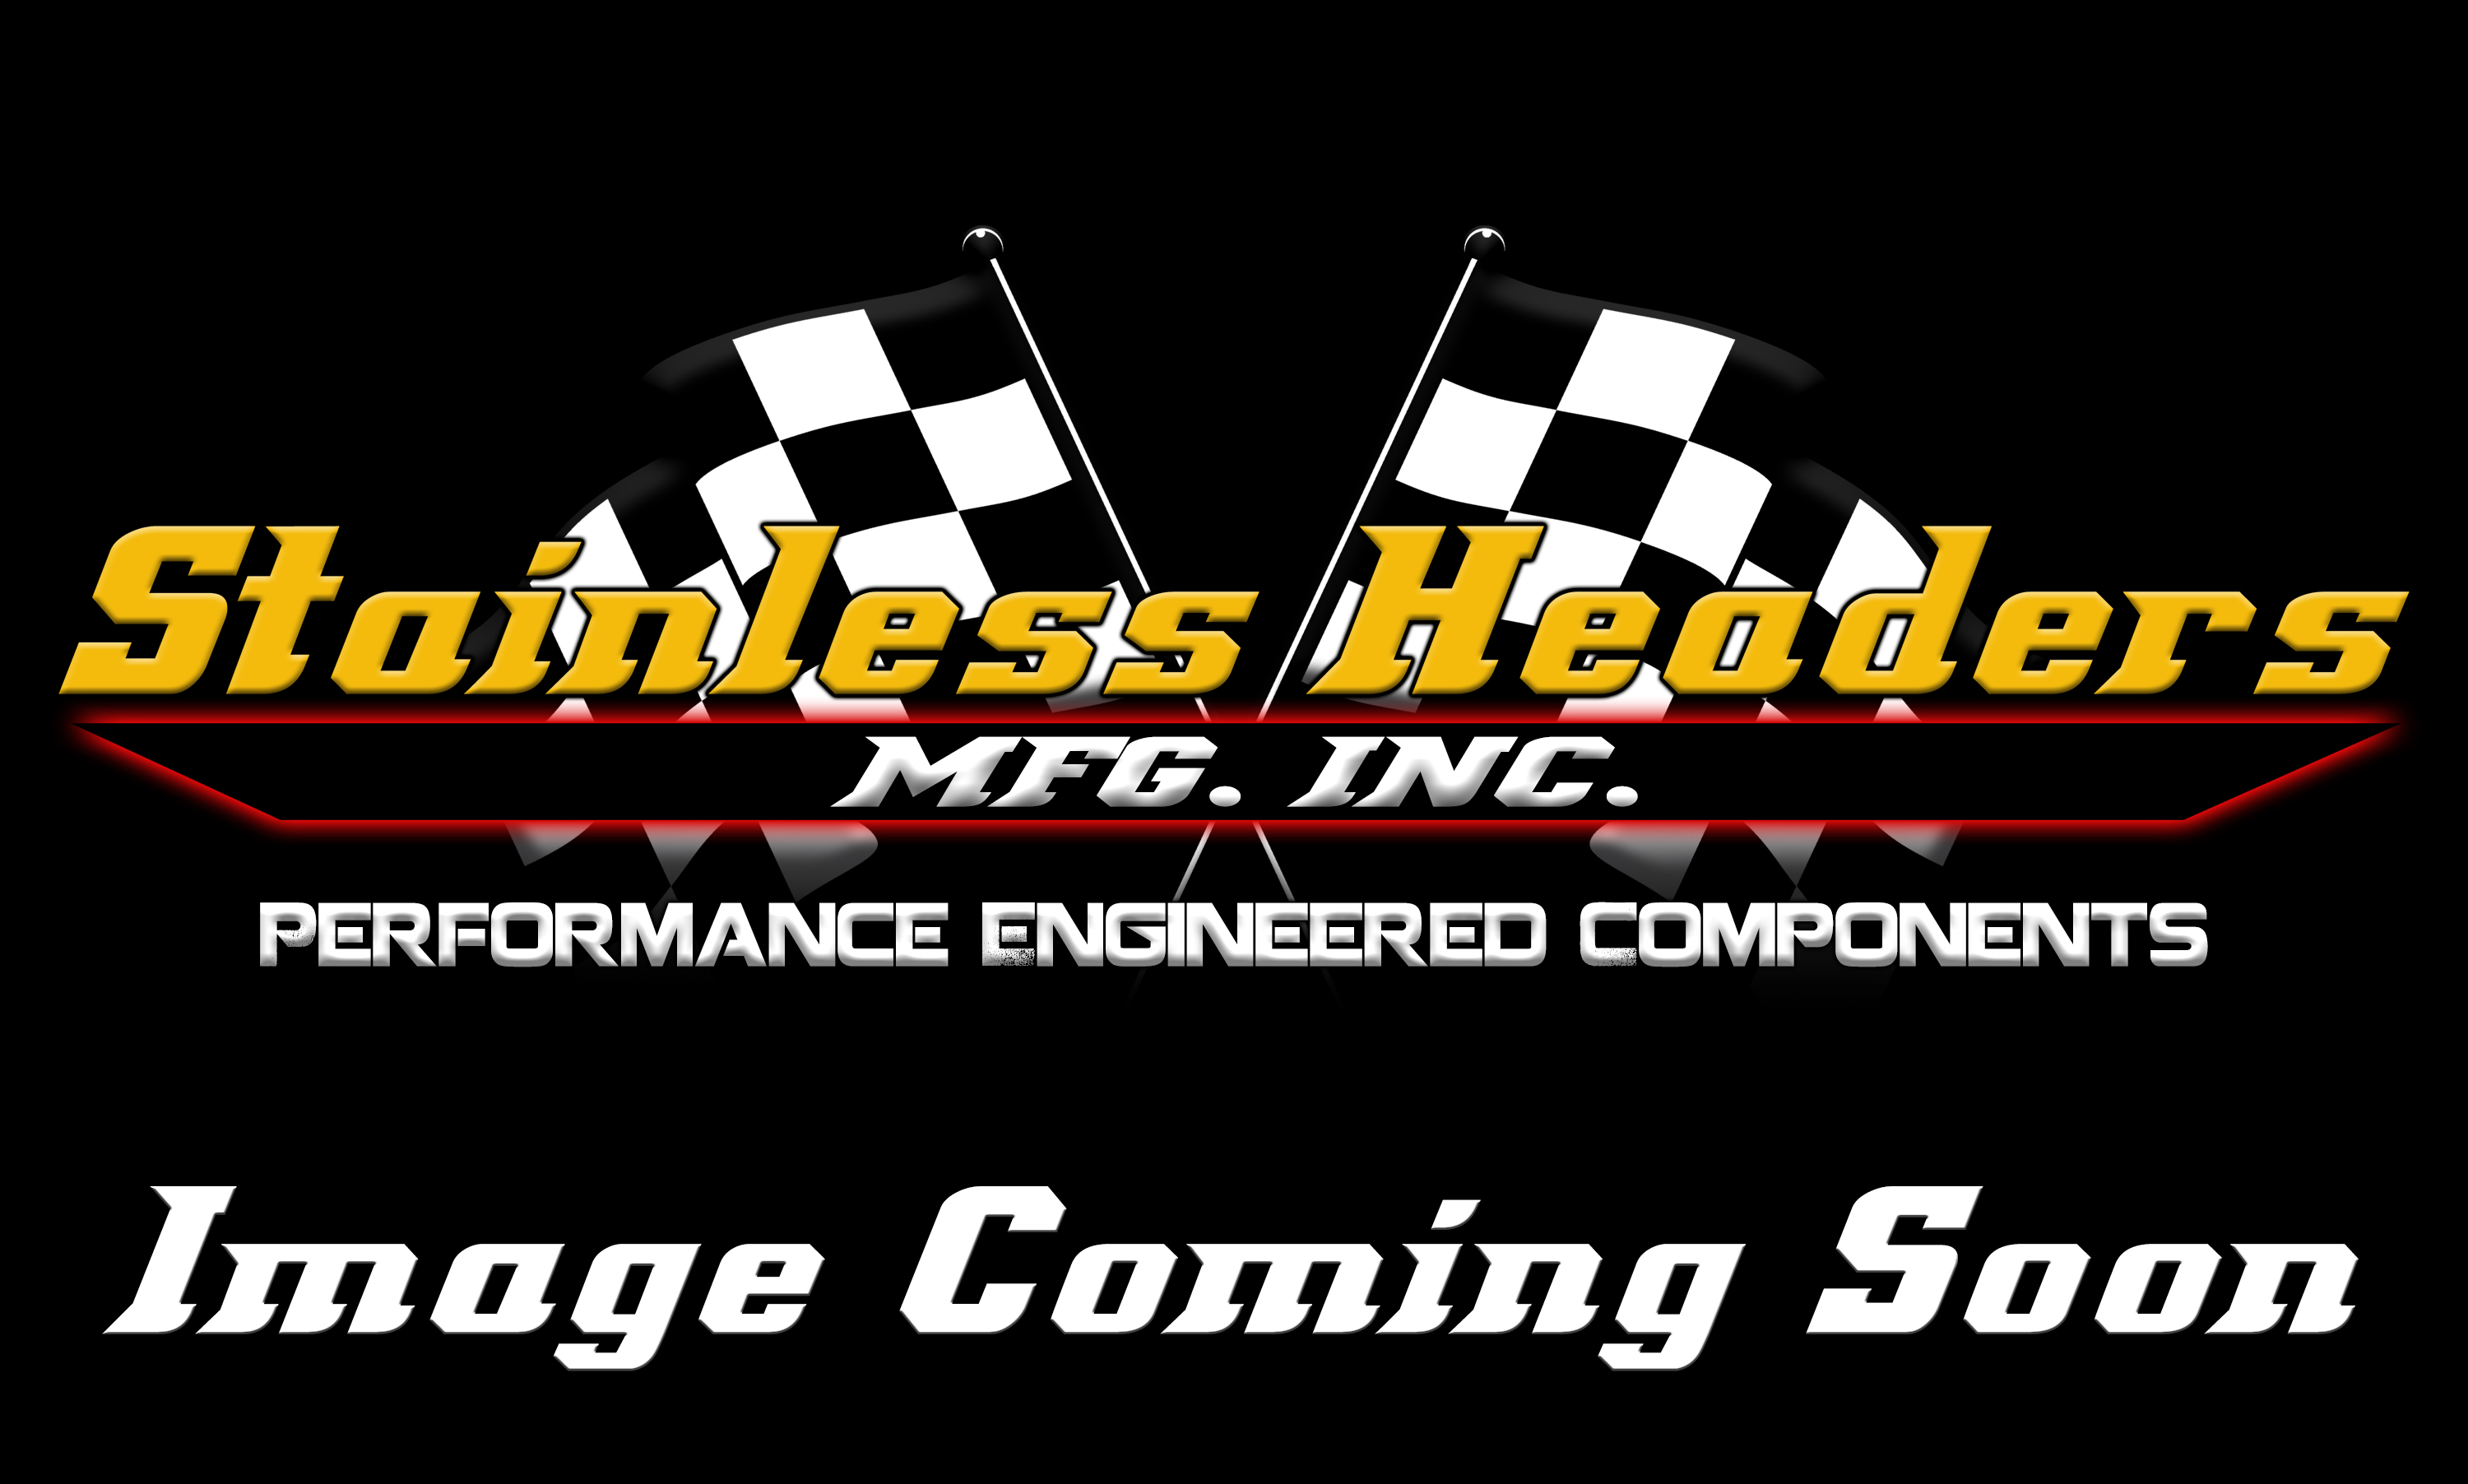 Stainless Headers - 2 1/2" Primary 4 into 1 Performance Merge Collector-16ga 304ss - Image 1